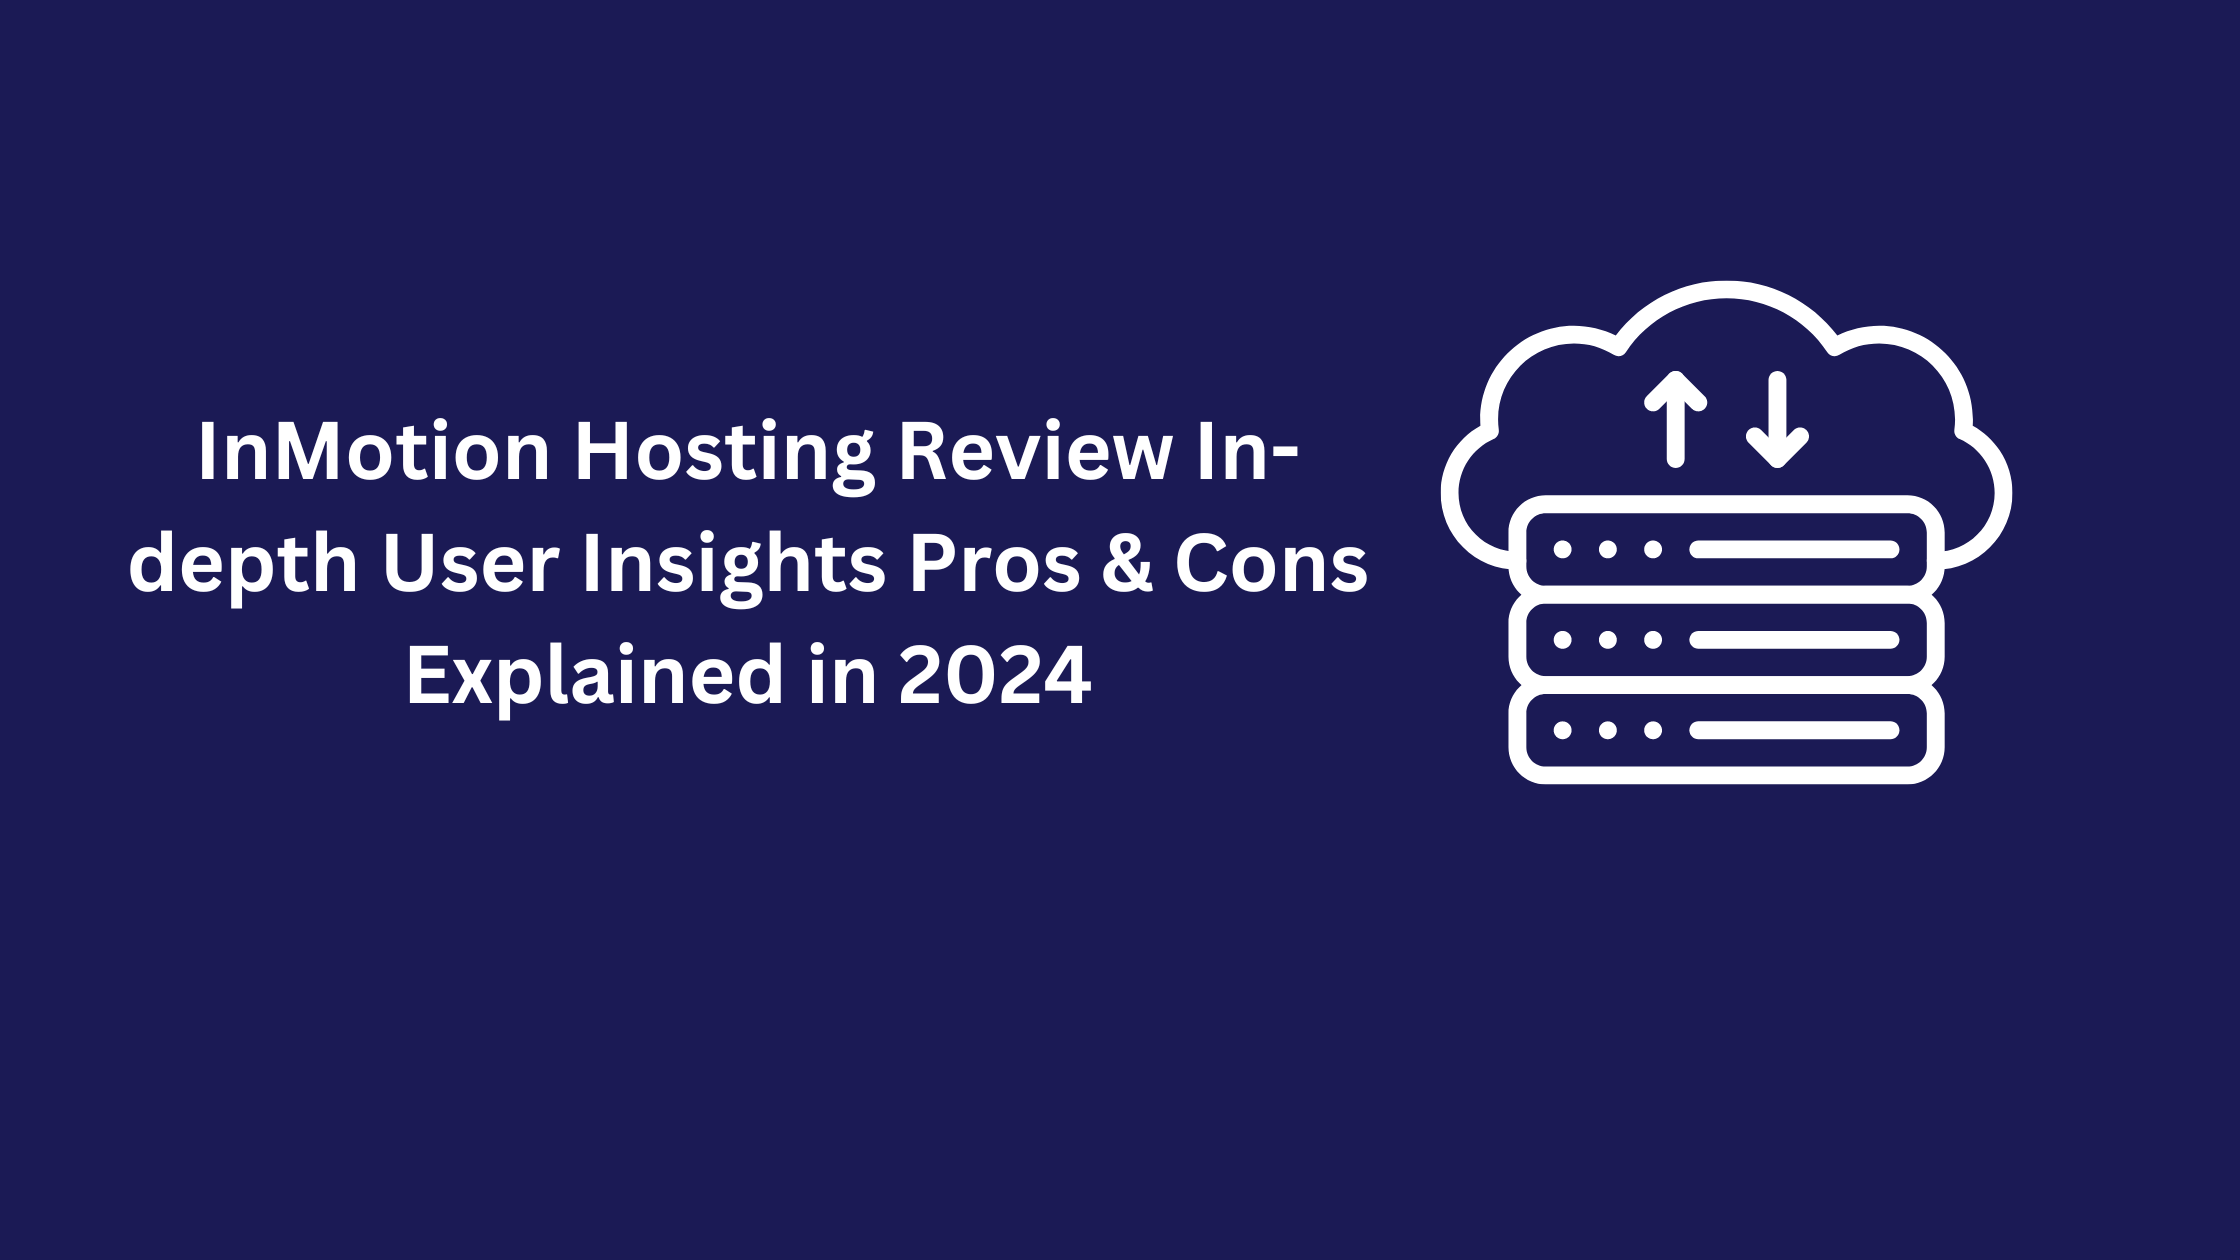 InMotion Hosting Review  In-depth User Insights Pros & Cons Explained in 2024